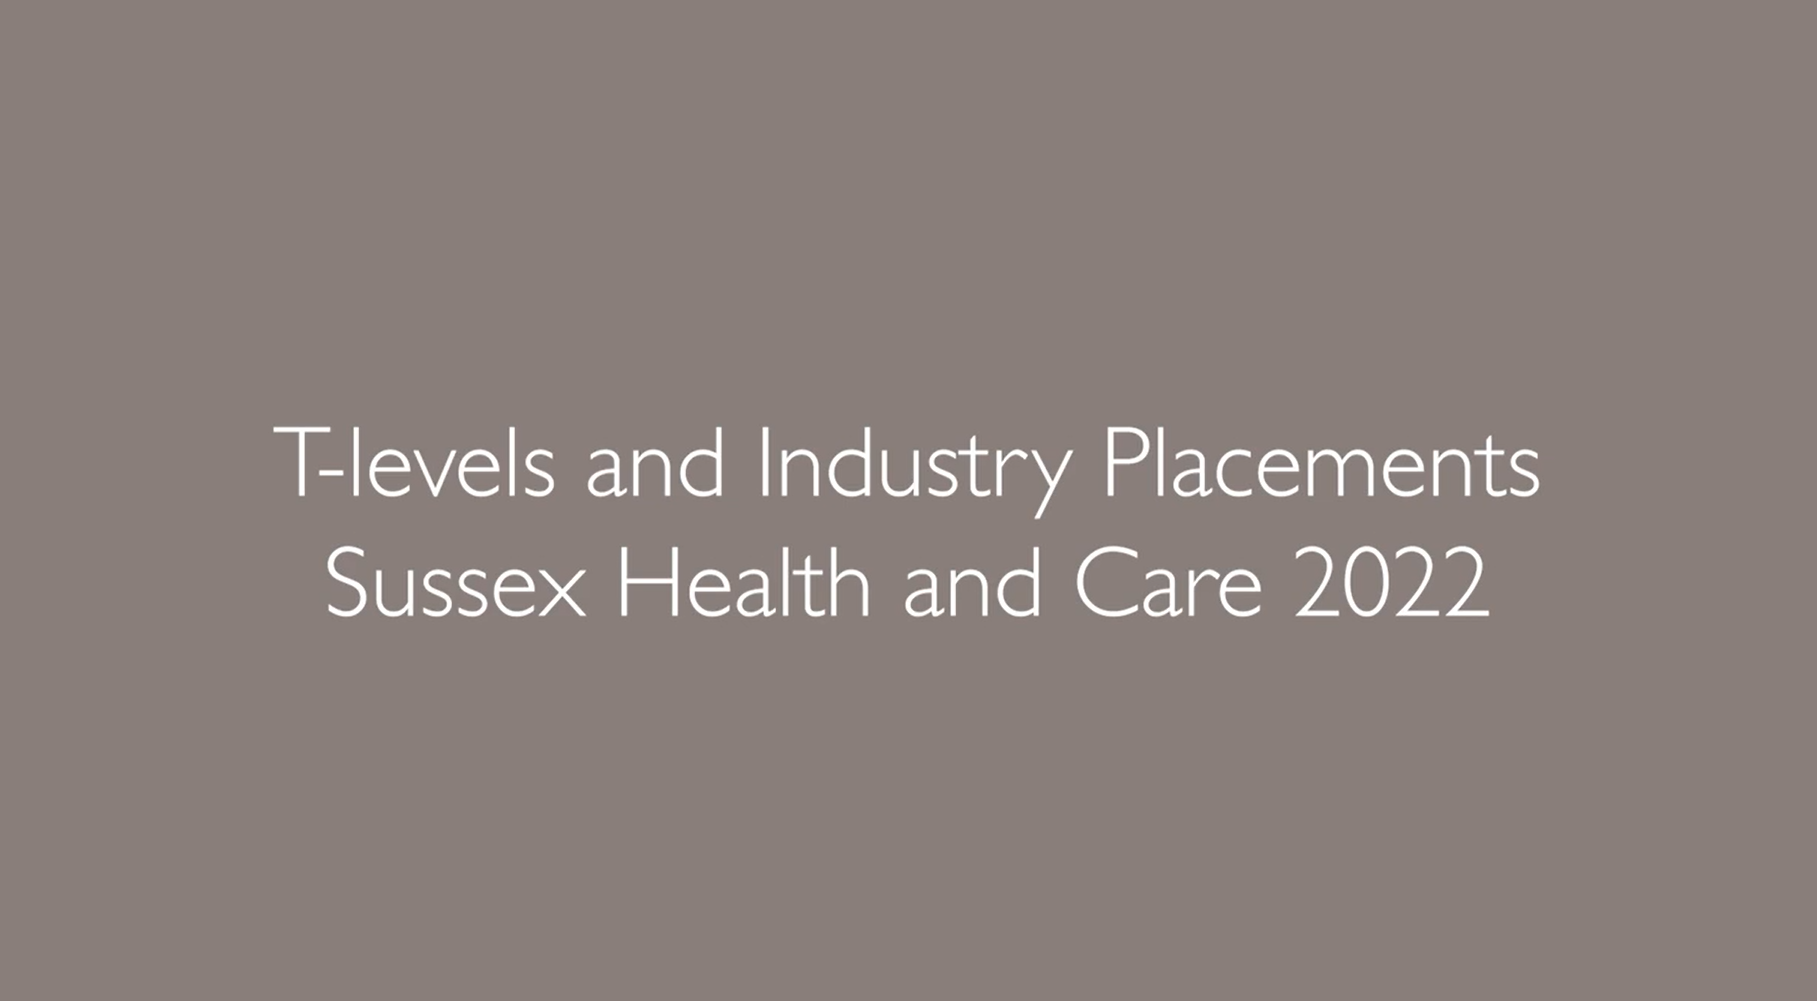 T-Levels and Industry Placements Sussex Health and Care 2022